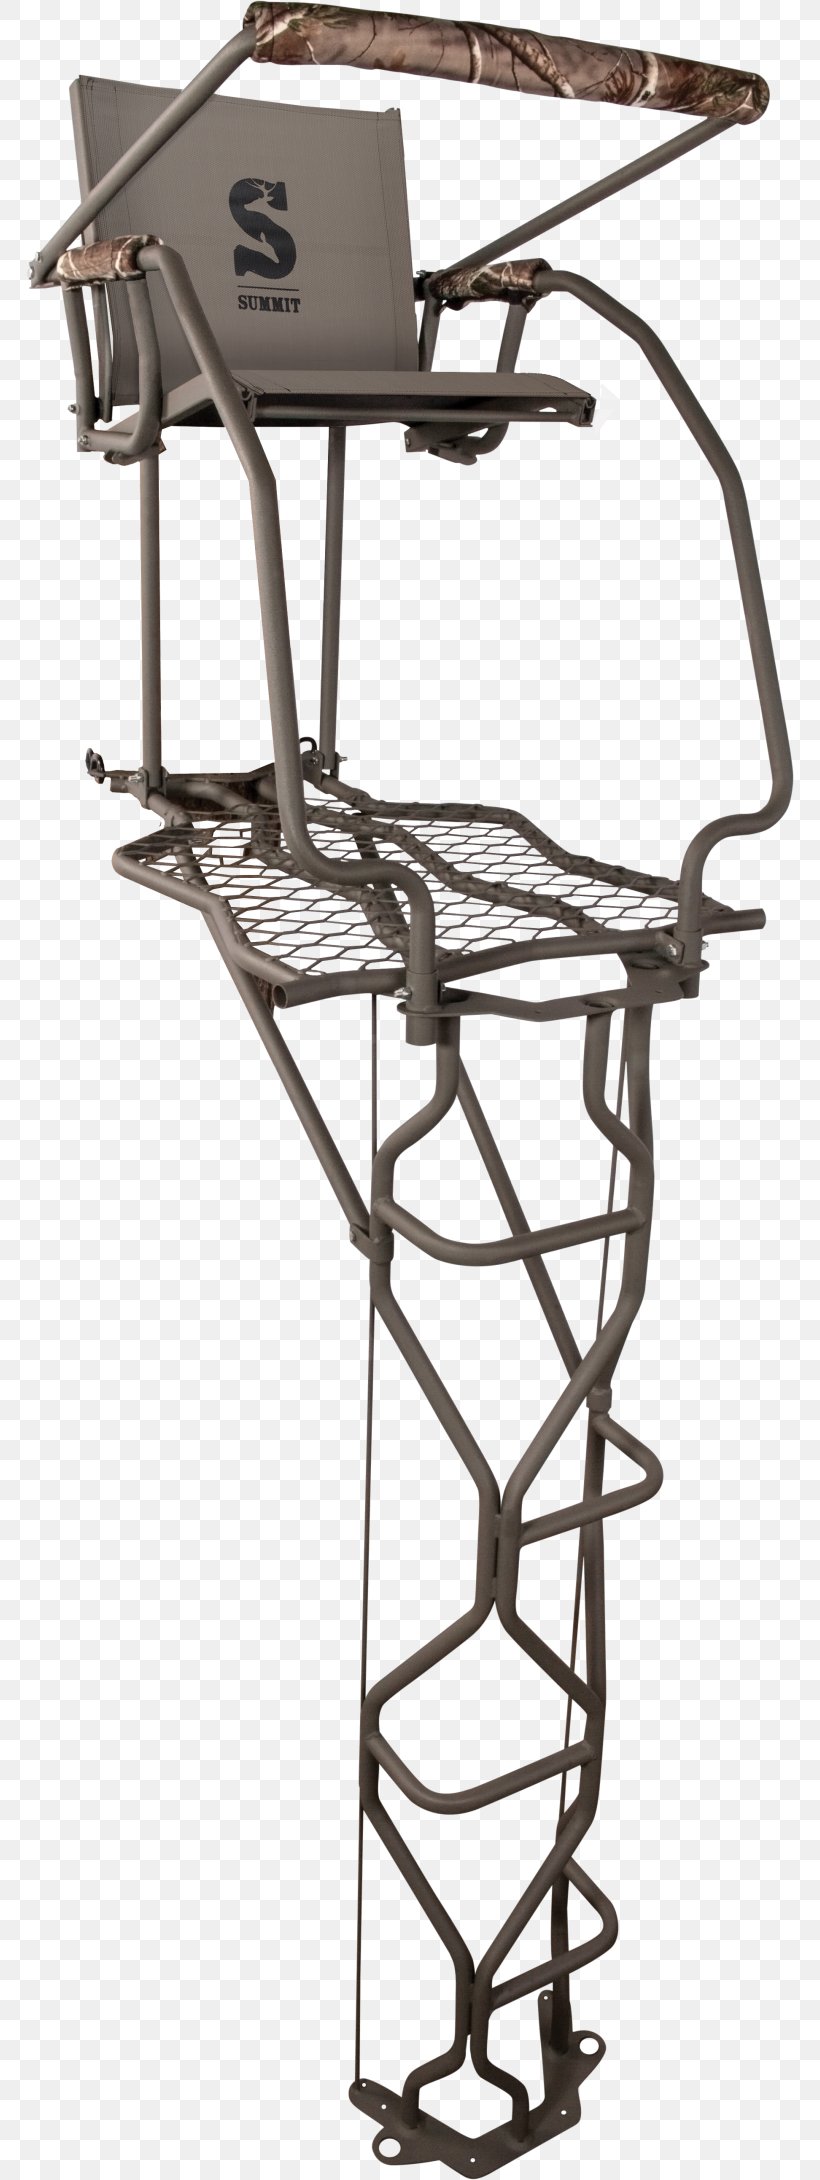 Tree Stands Hunting Ladder Vine, PNG, 768x2180px, Tree Stands, Archery, Biggame Hunting, Black And White, Bowhunting Download Free